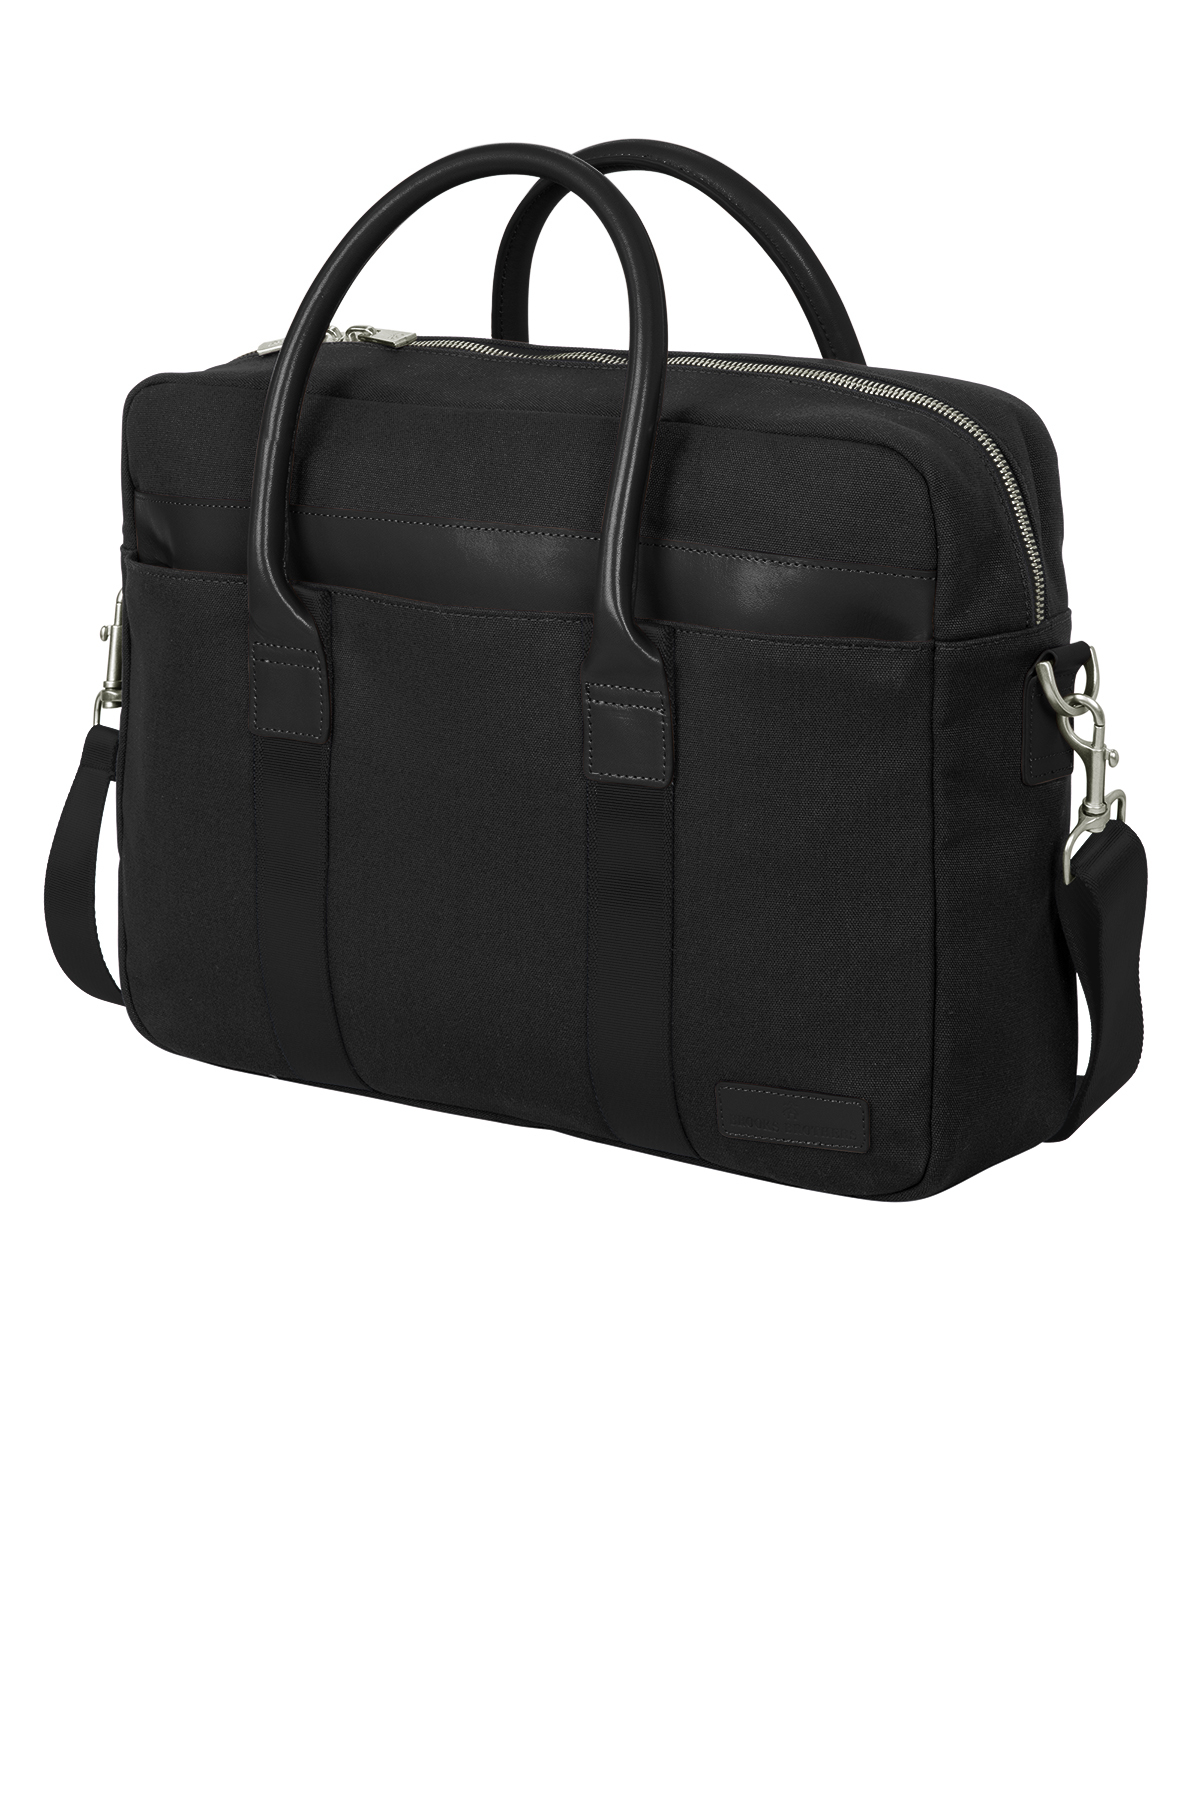 Brooks Brothers Wells Briefcase | Product | SanMar